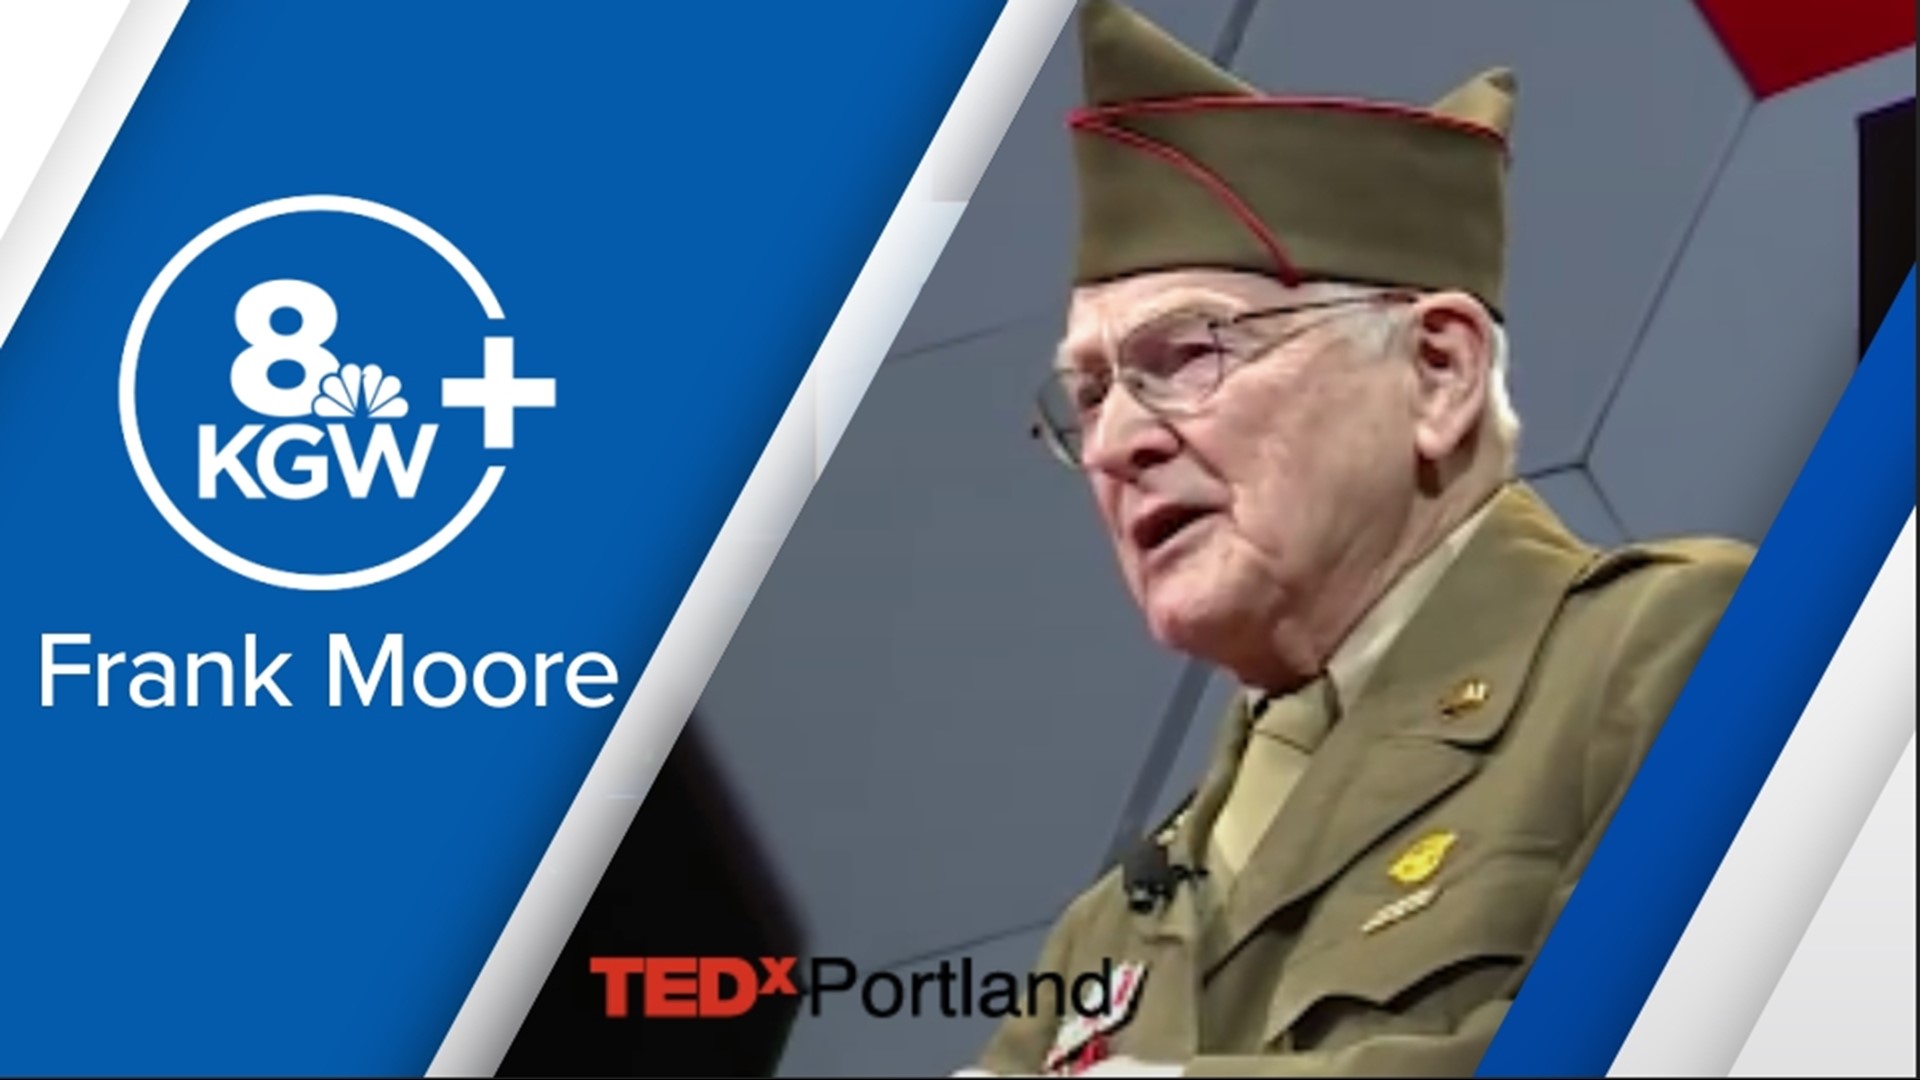 The remarkable story of Frank Moore and the true love of his life told in his own words in a touching TEDxPortland presentation